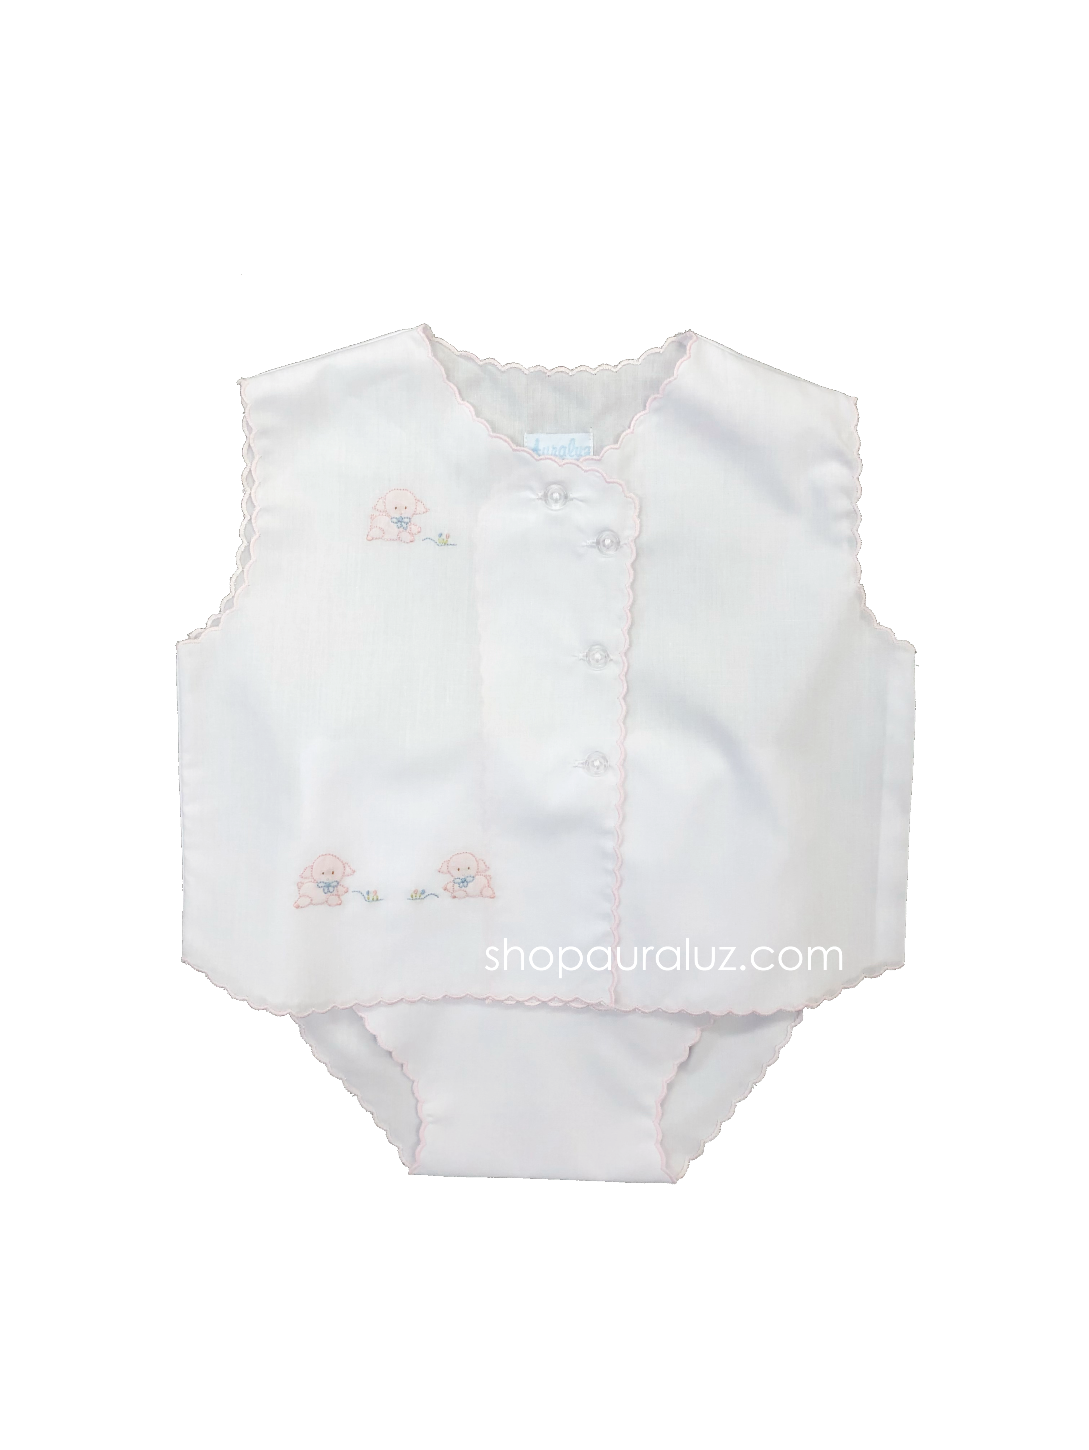 Auraluz Sleeveless Diaper shirt/cover set...White with pink scallops and embroidered tiny lambs